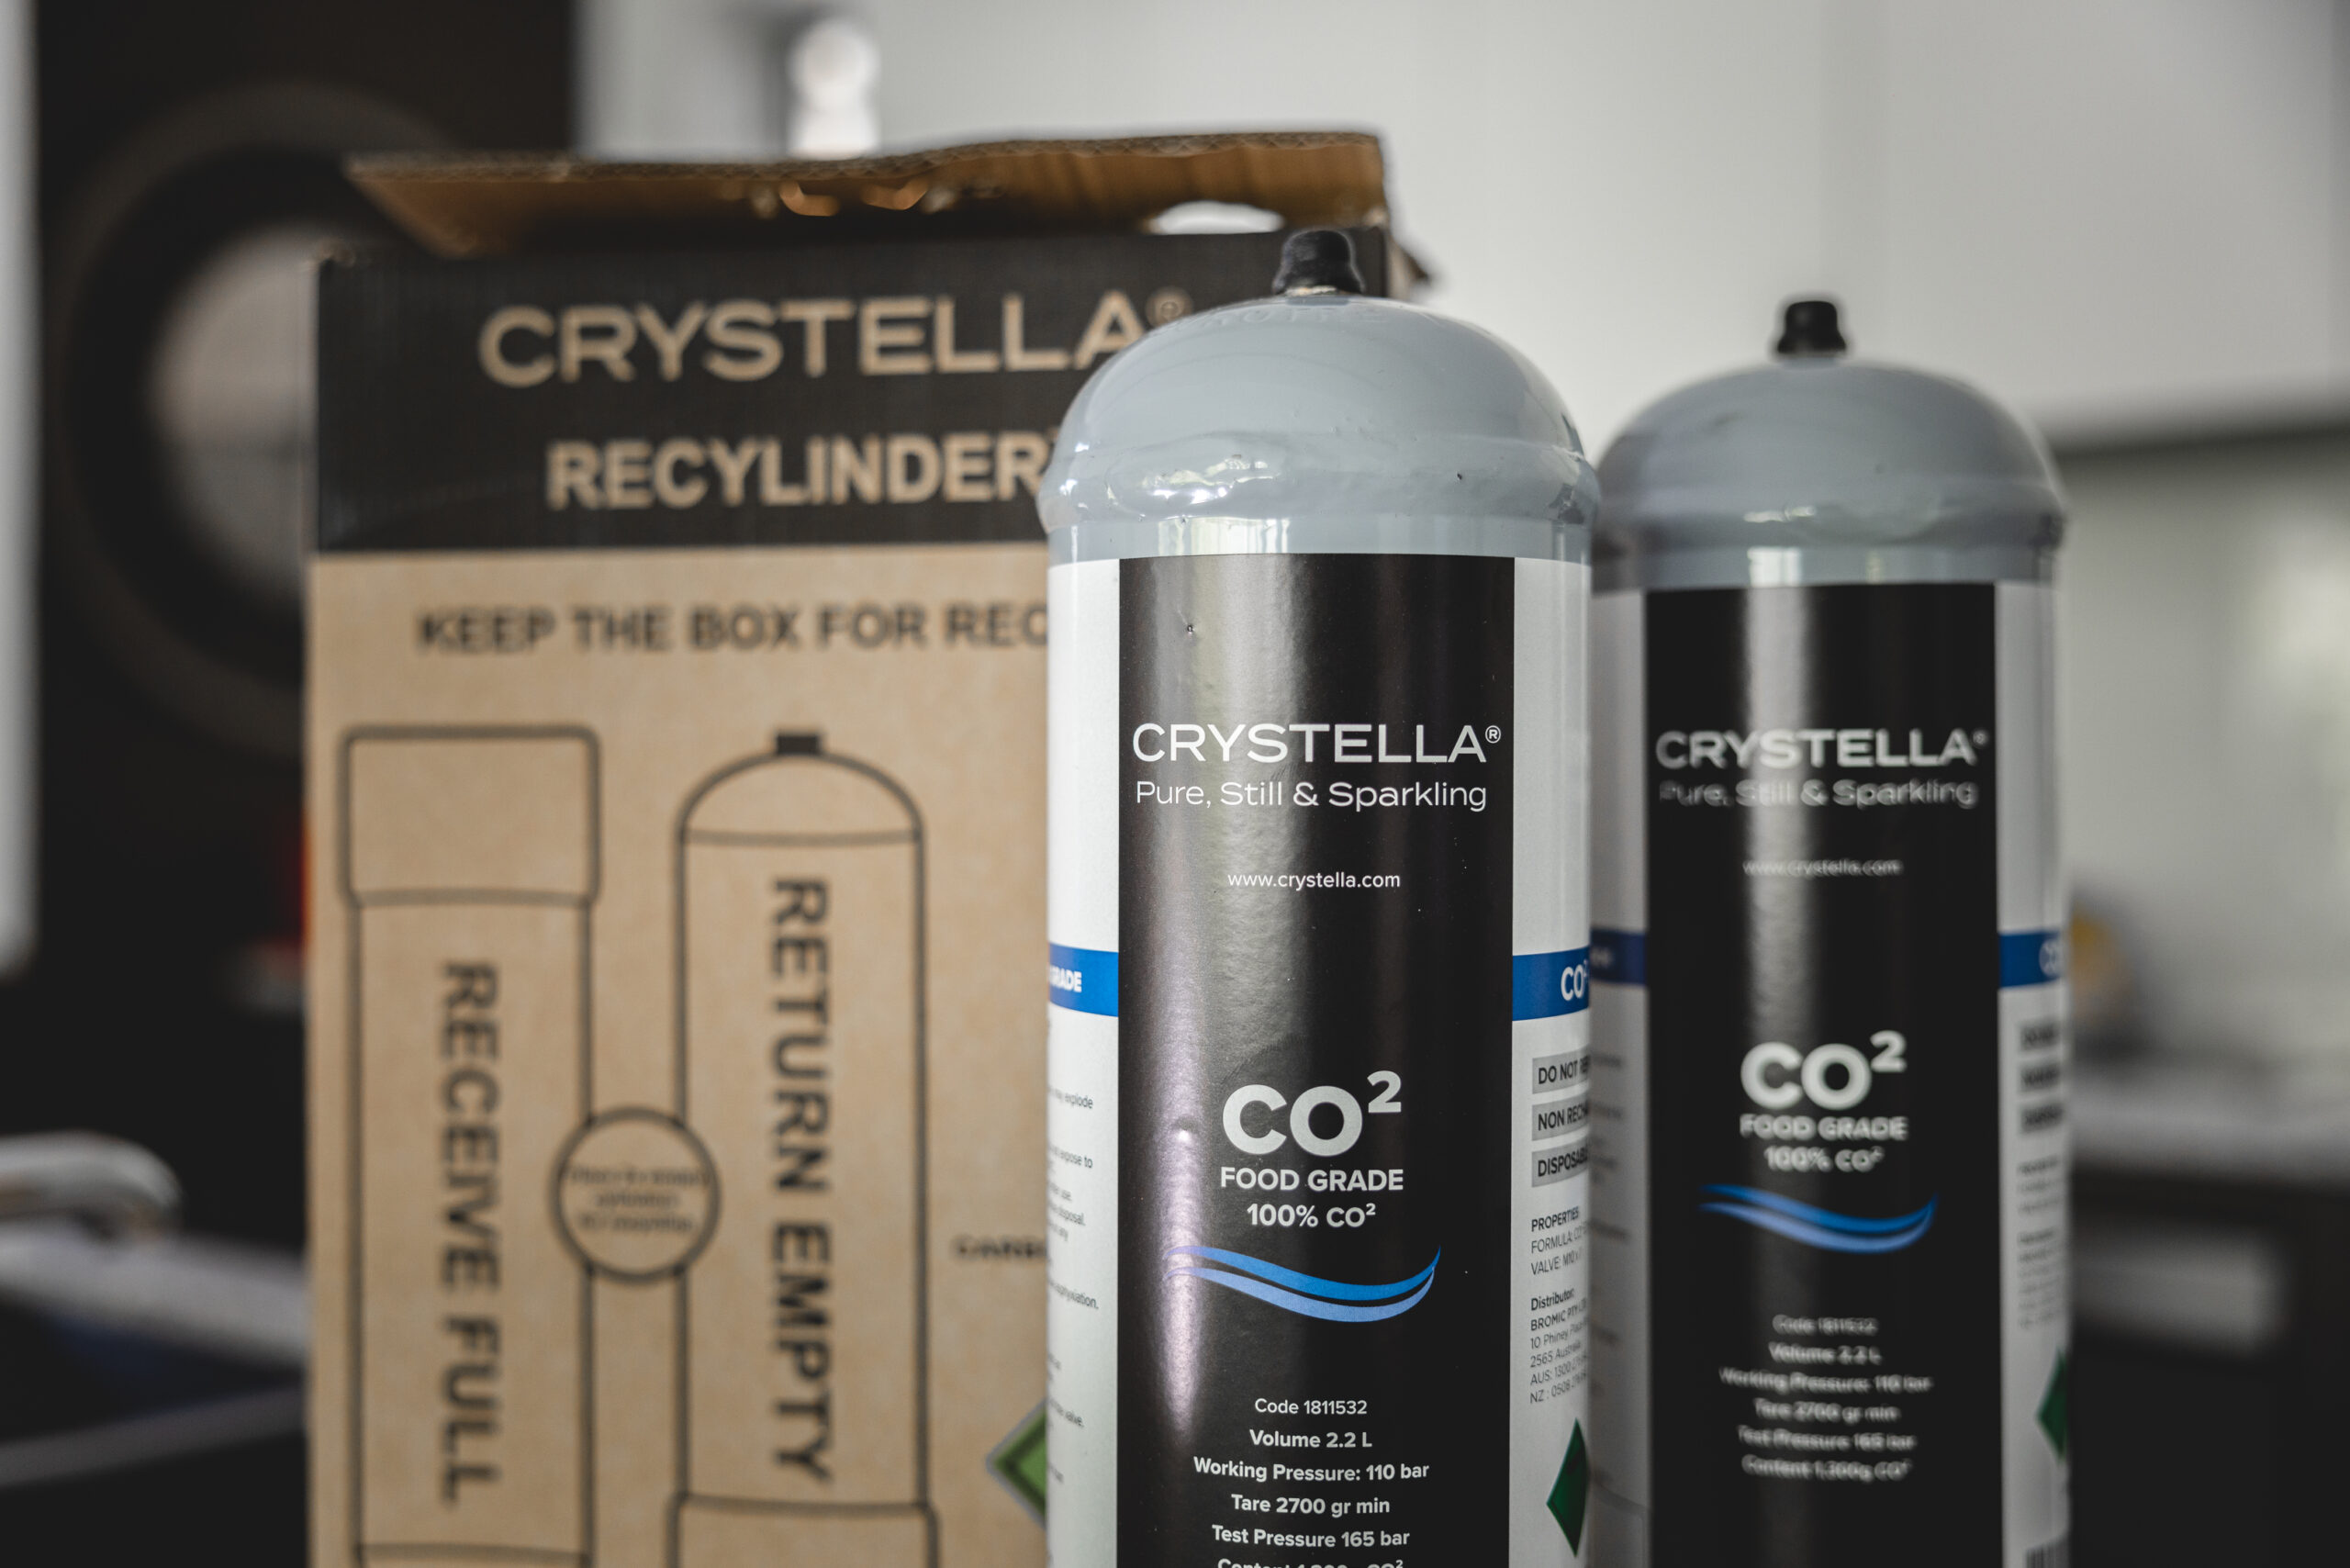 Crystella co2 recyclinder bottles and packaging